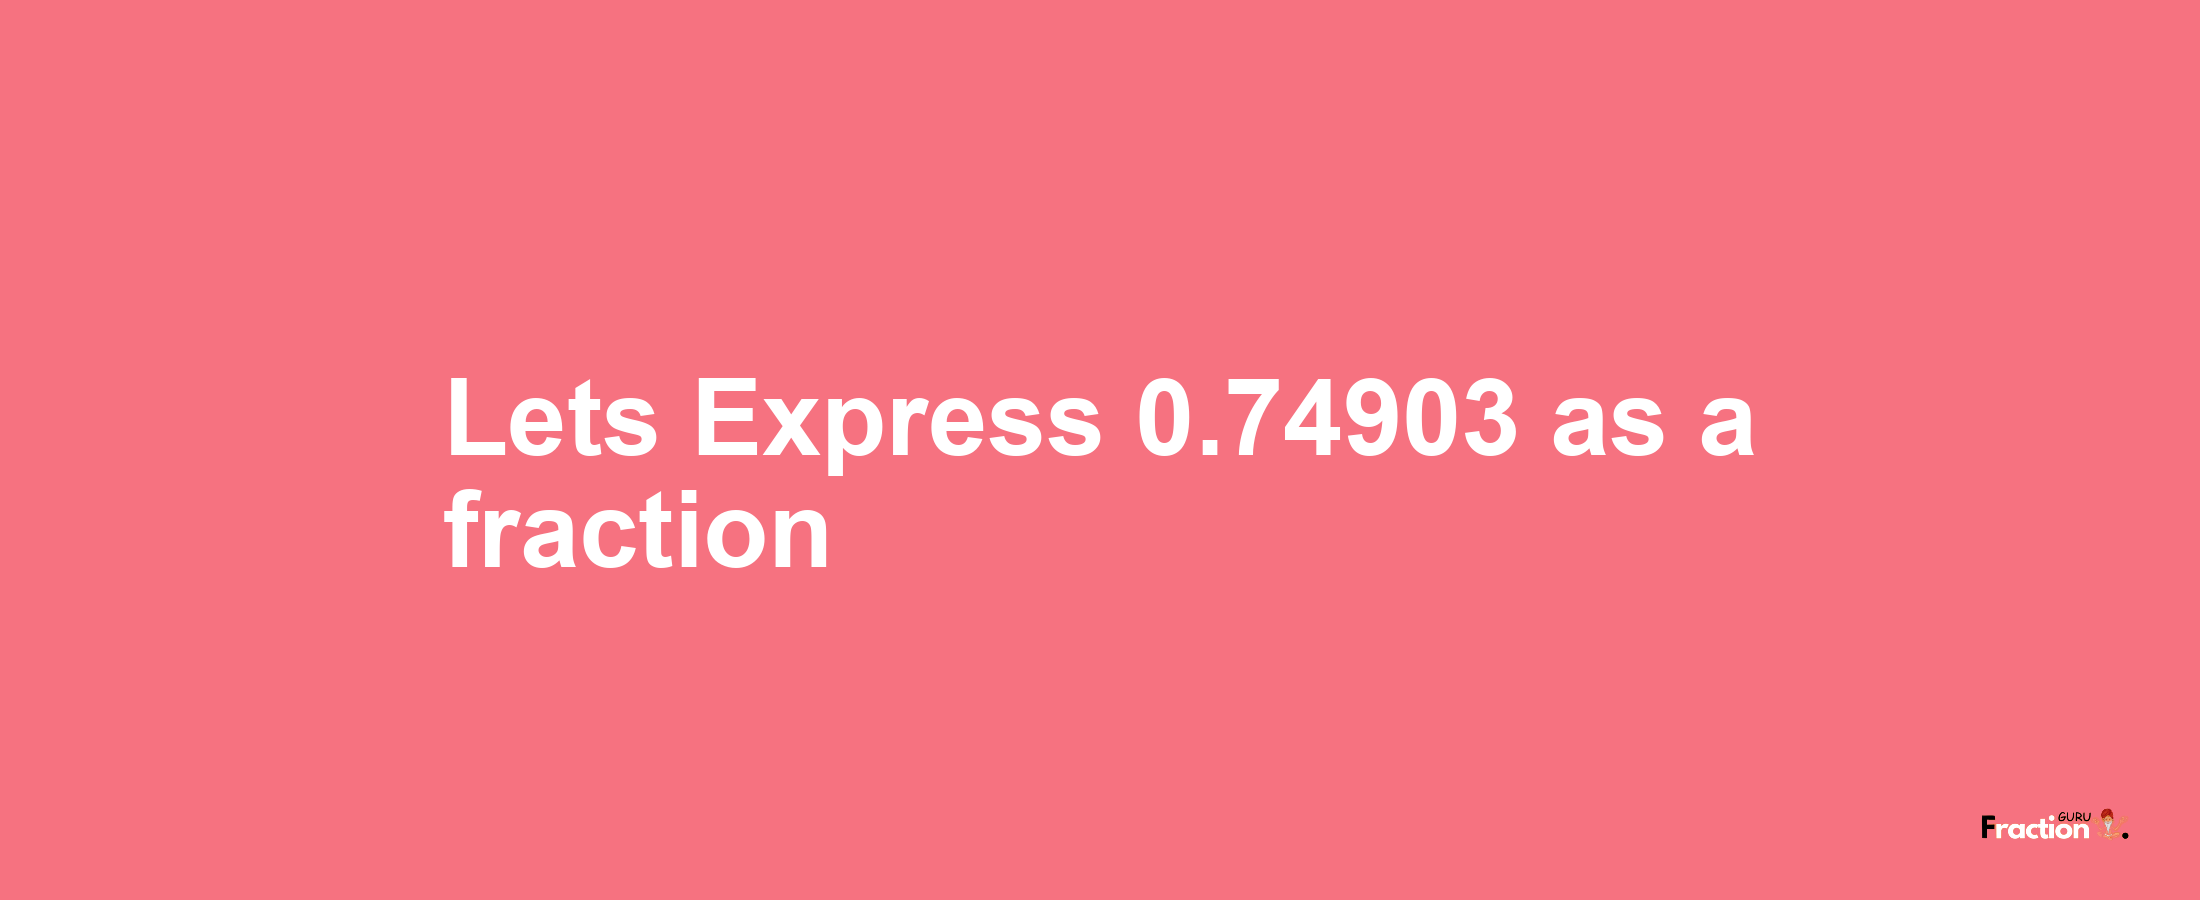 Lets Express 0.74903 as afraction